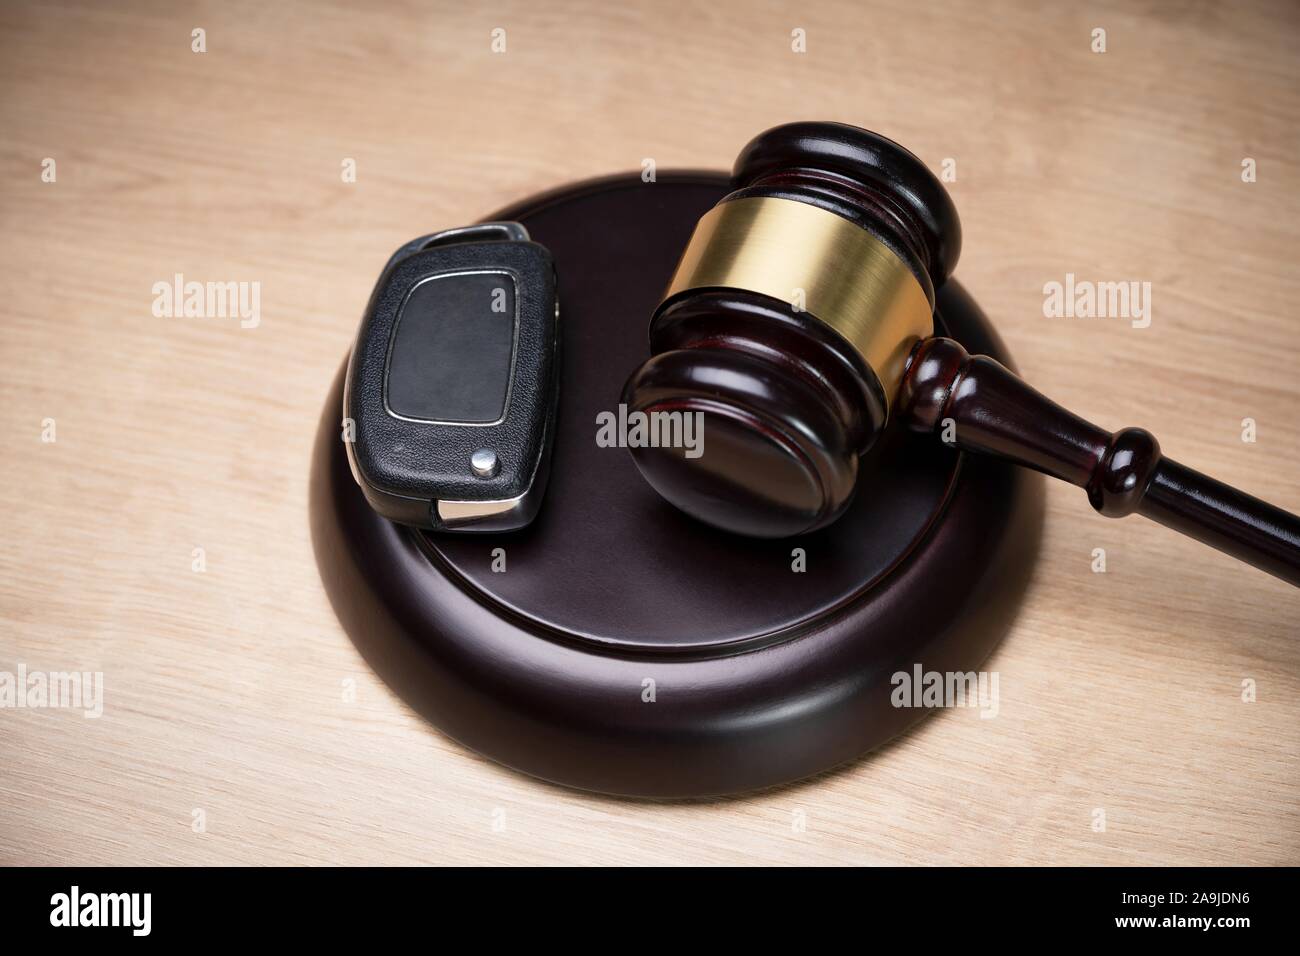 Overhead View Of A Car Key And Mallet On The Striking Block Stock Photo